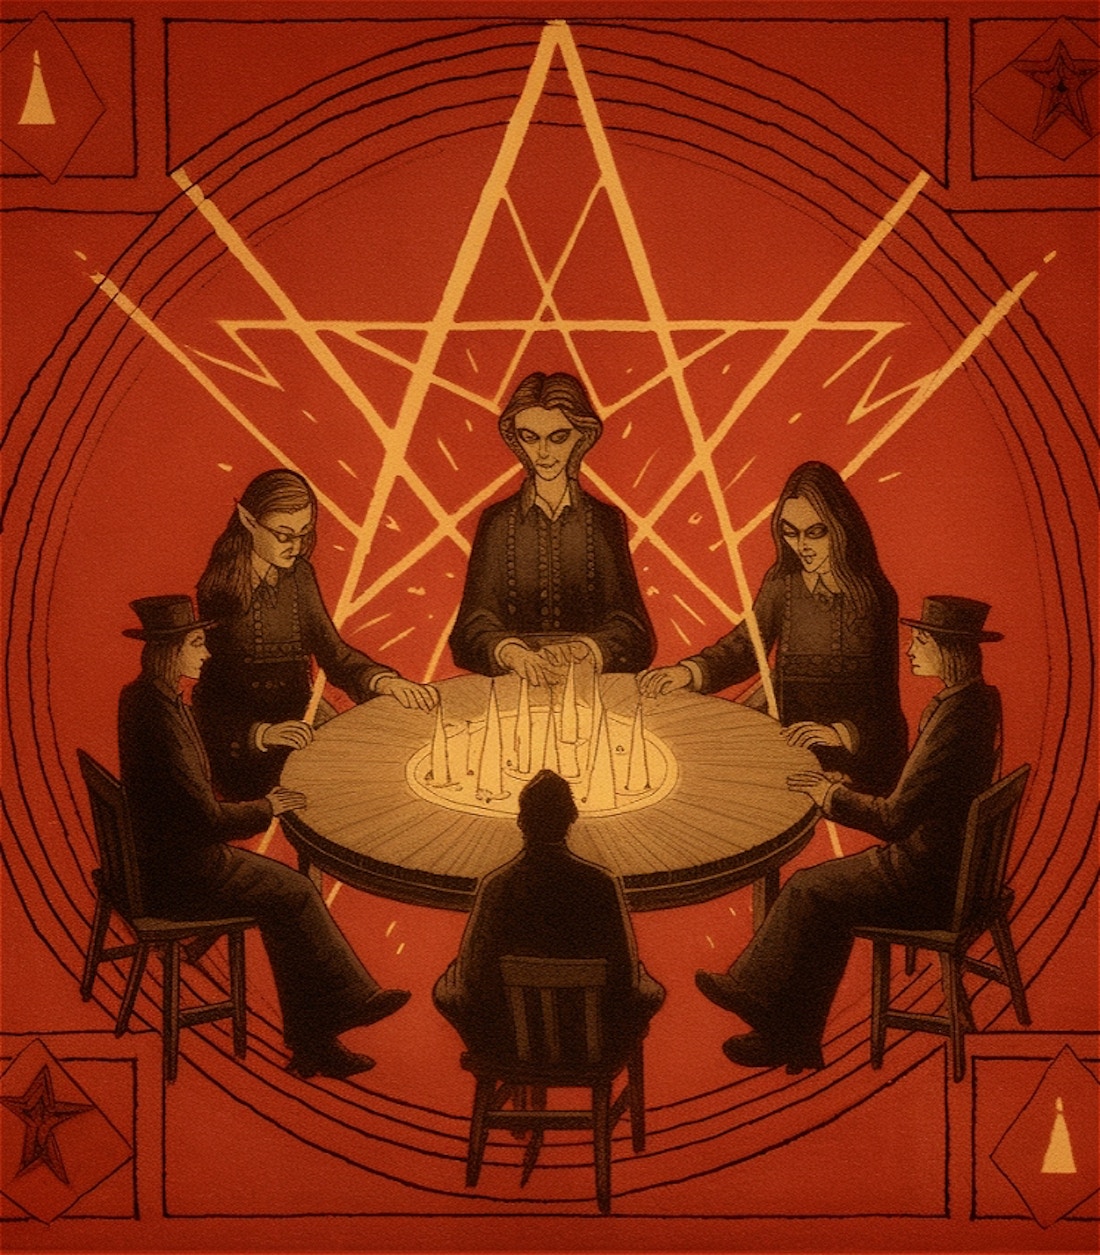 A red background with a yellow pentagram sits behind six people sitting around a table involved in seance